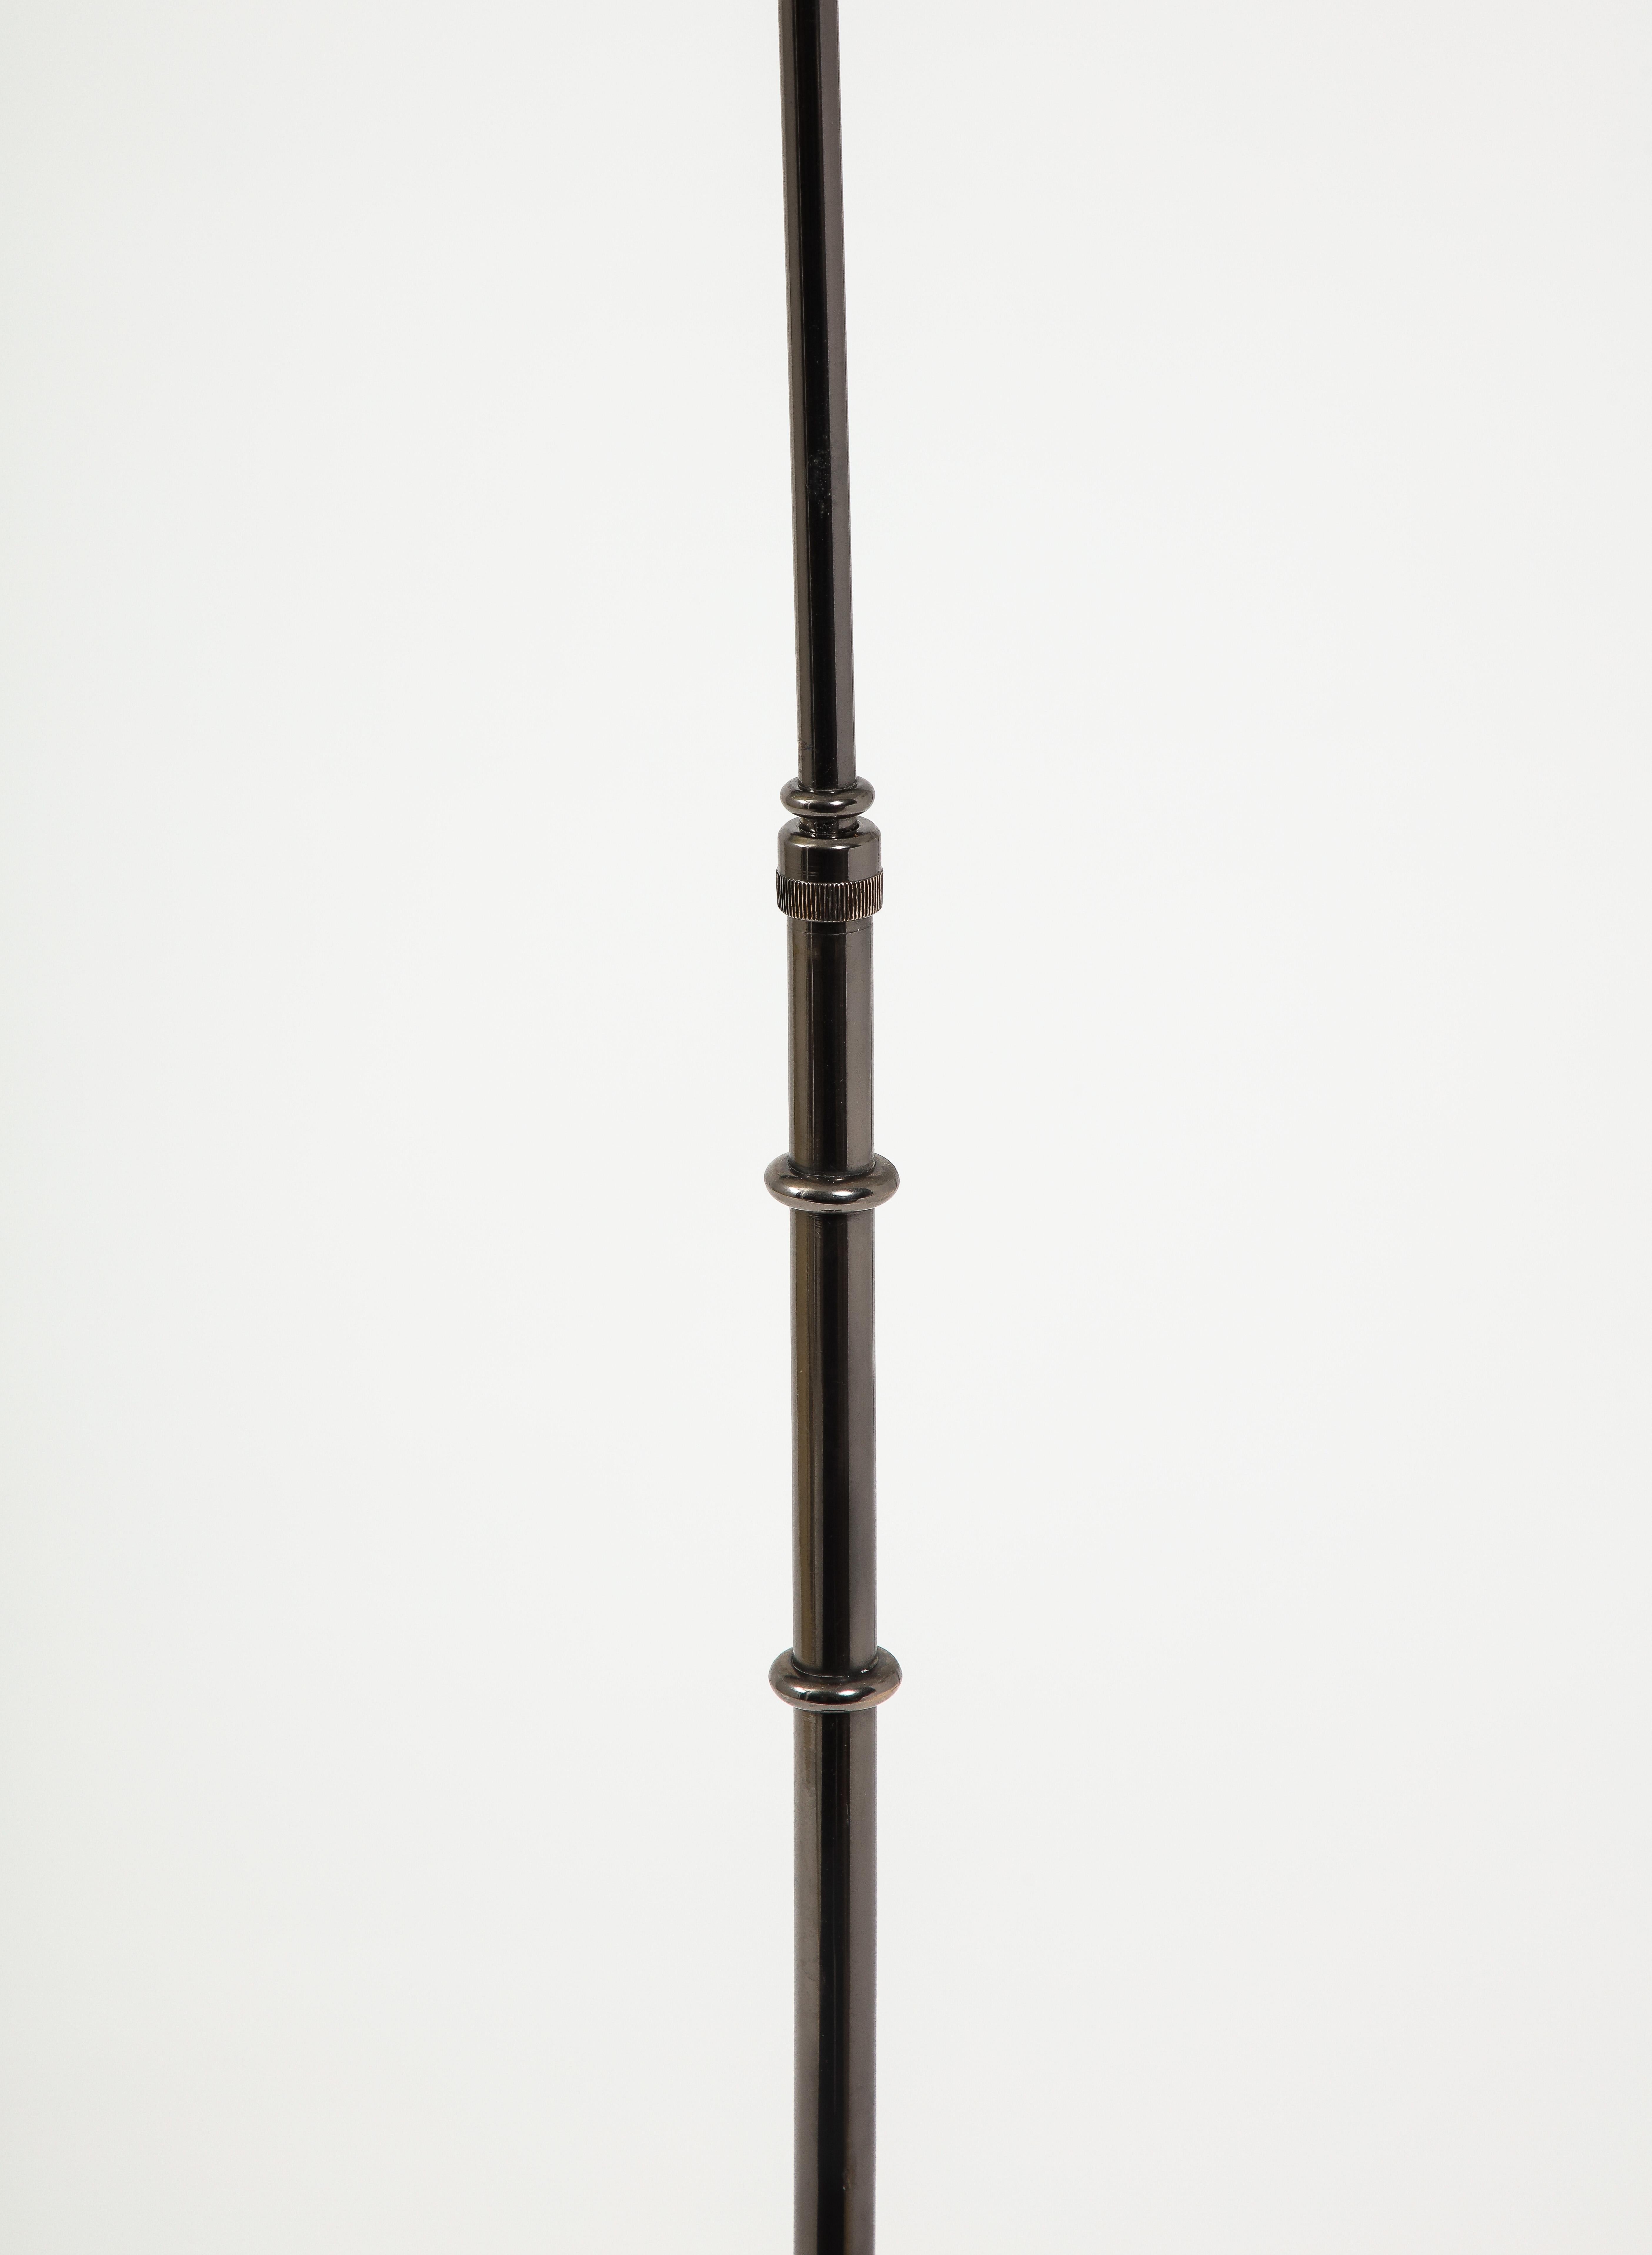 French Monix Black Nickel Reading Floor Lamp, France 1950's For Sale